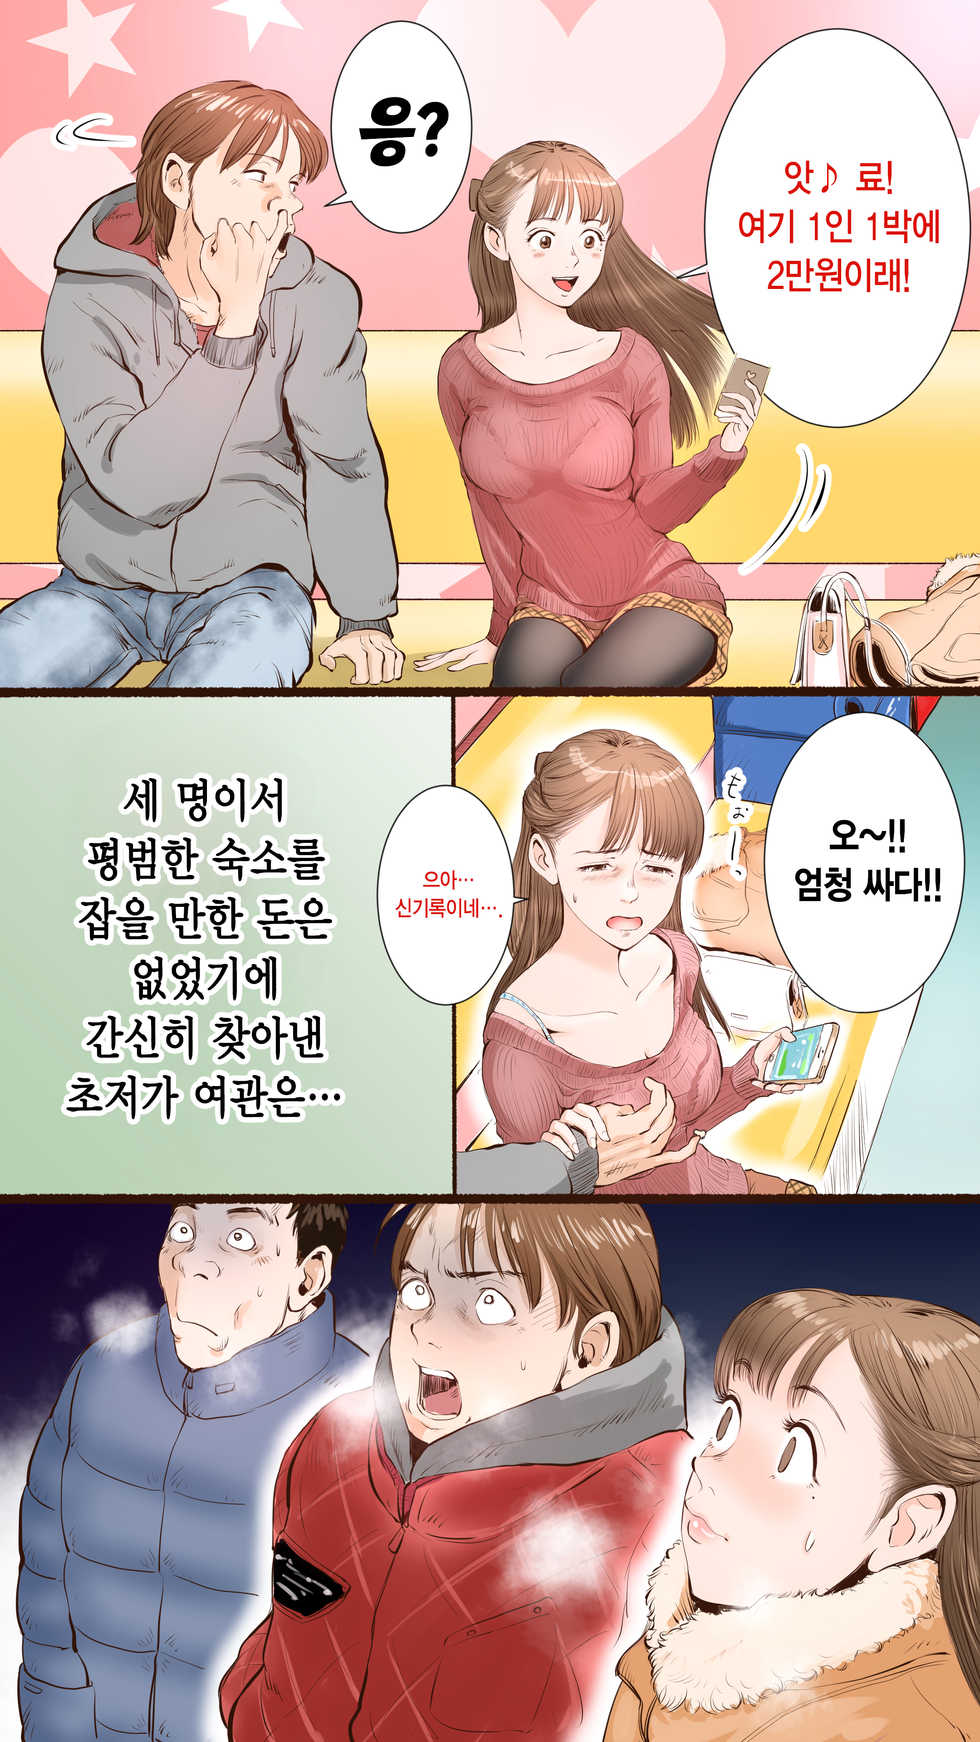 Story of Hot Spring Hotel - Page 3